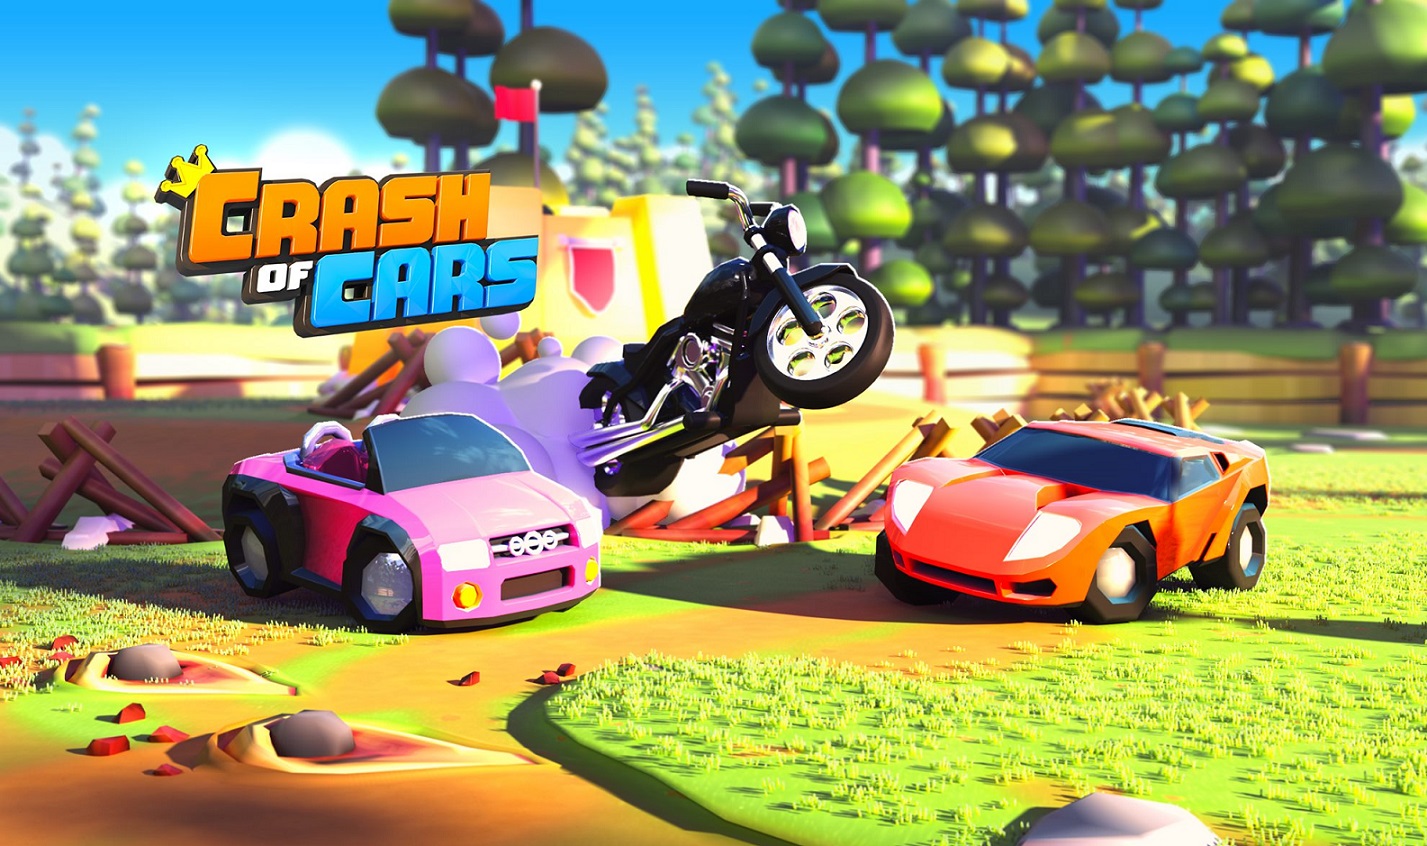 How to get unlimited gems and coins in Crash of Cars